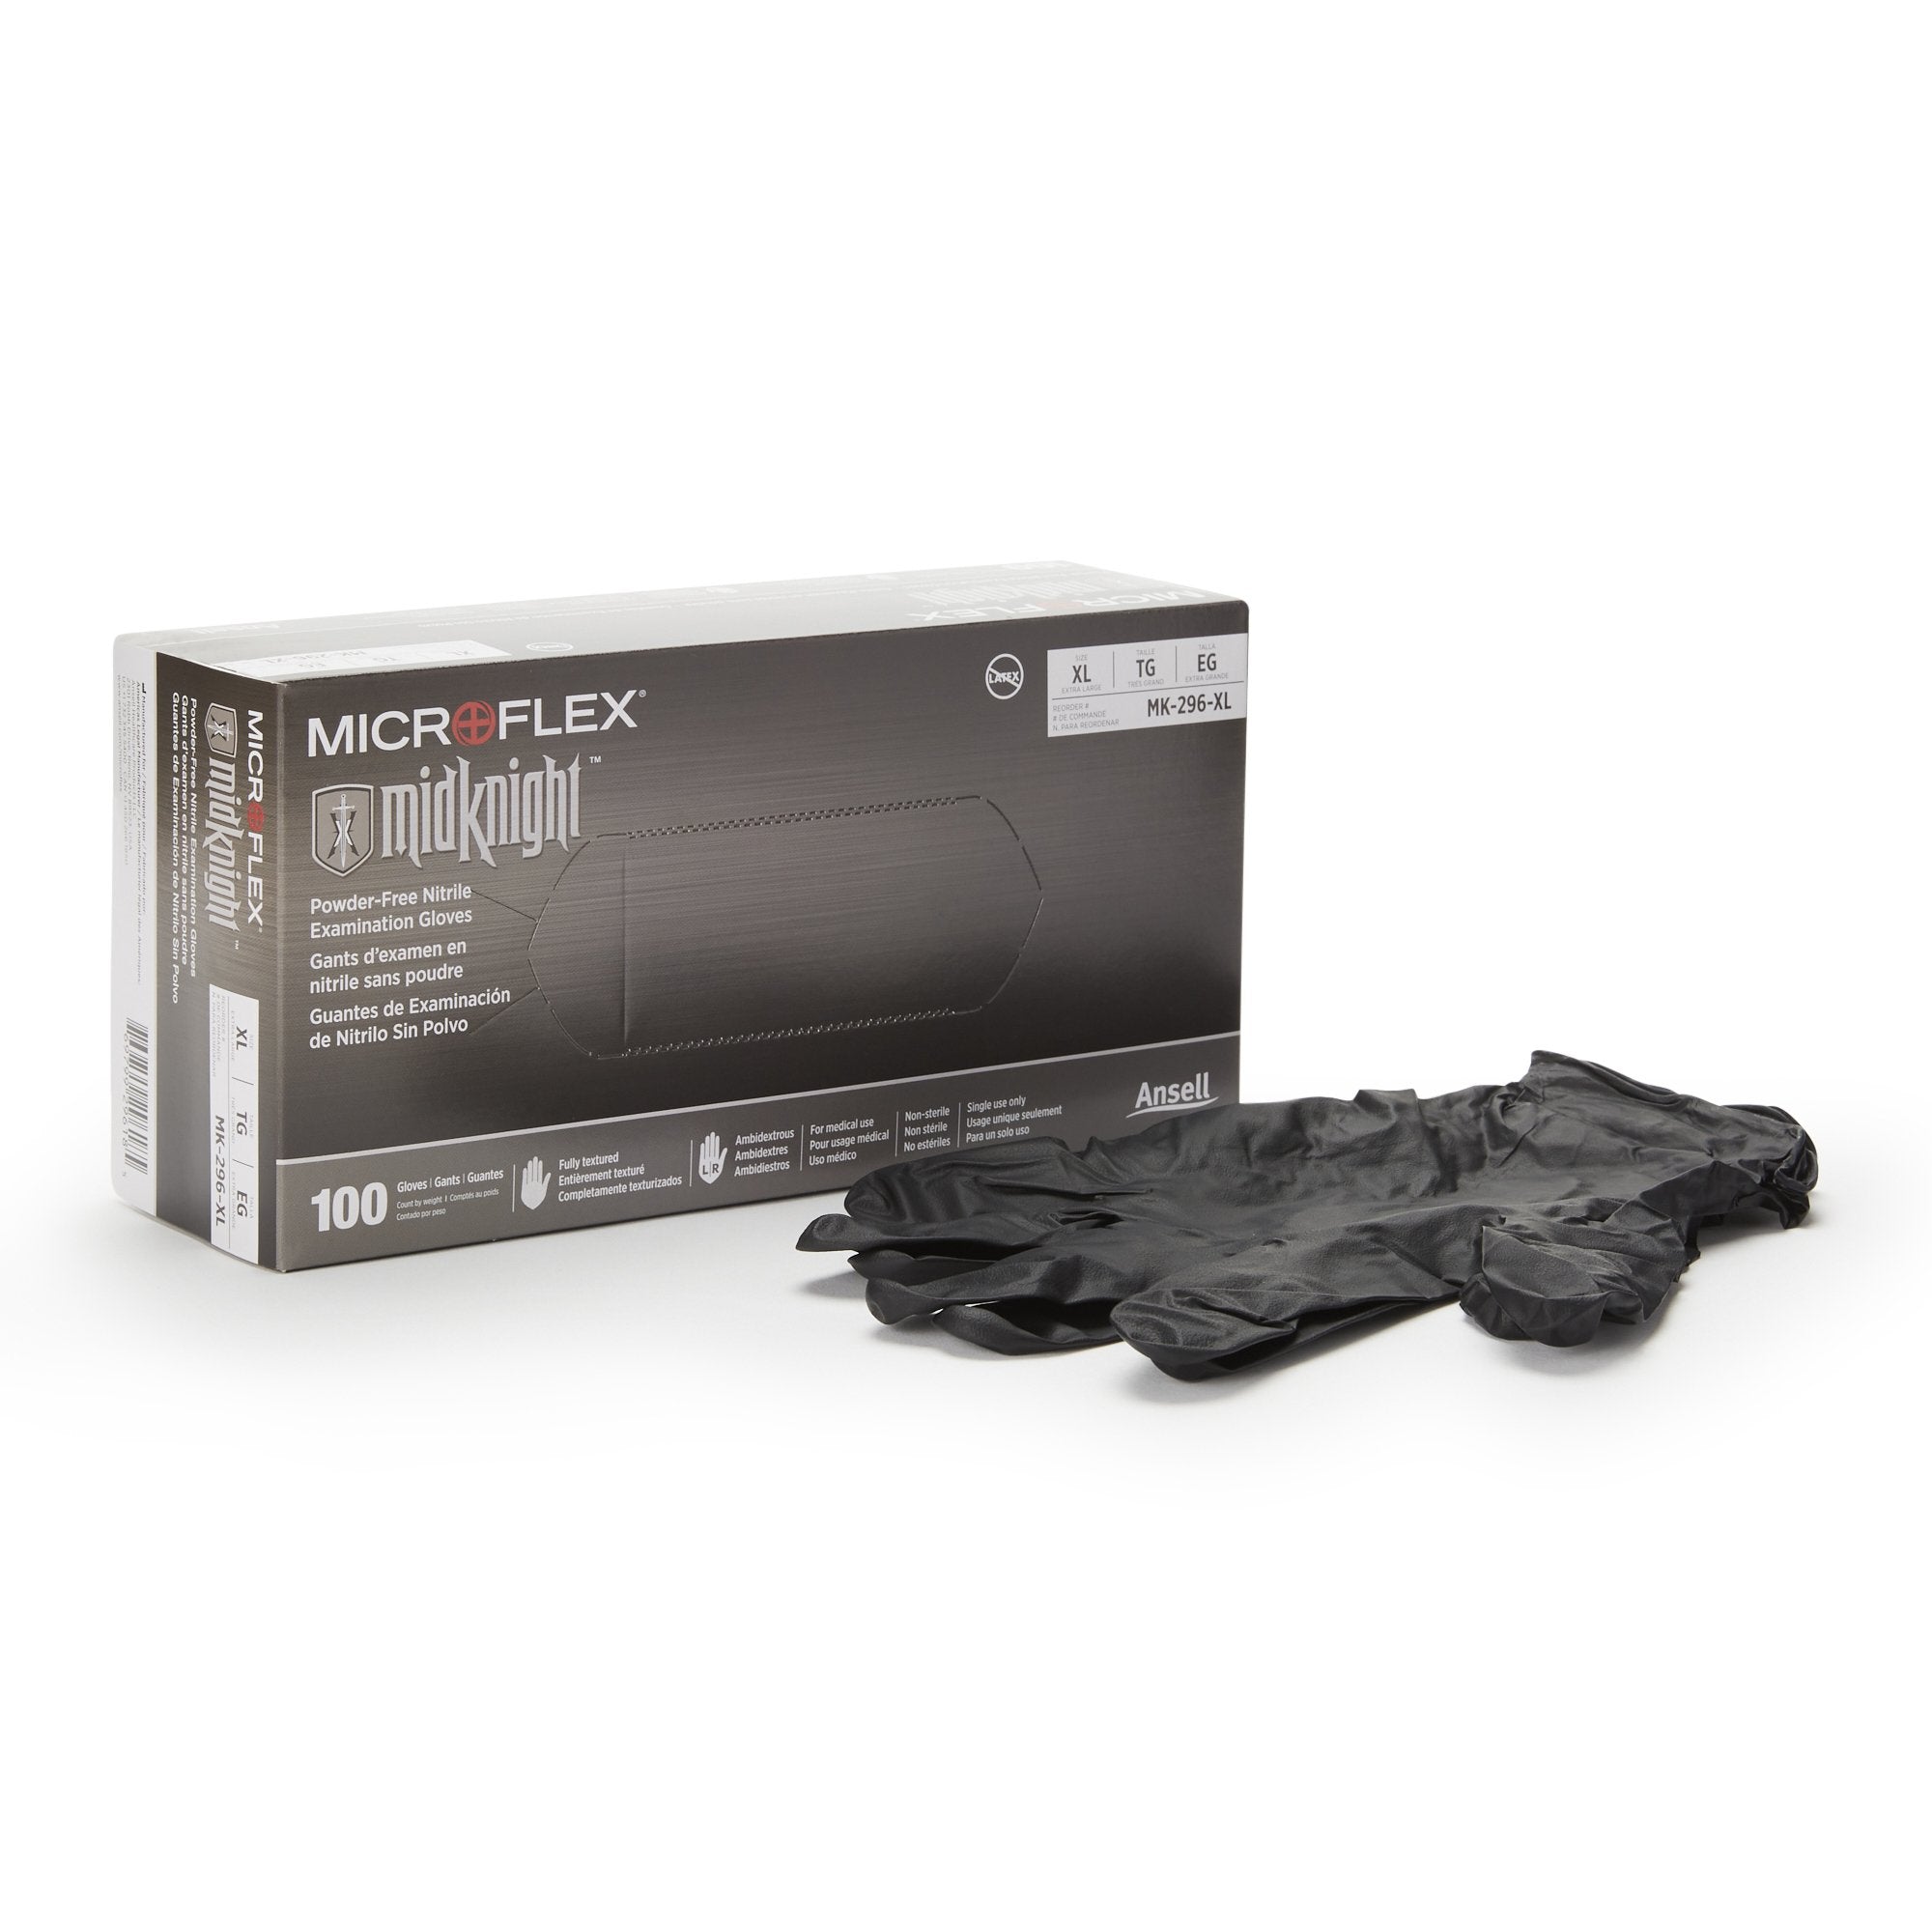 Exam Glove MICROFLEX MidKnight X-Large NonSterile Nitrile Standard Cuff Length Fully Textured Black Fentanyl Tested